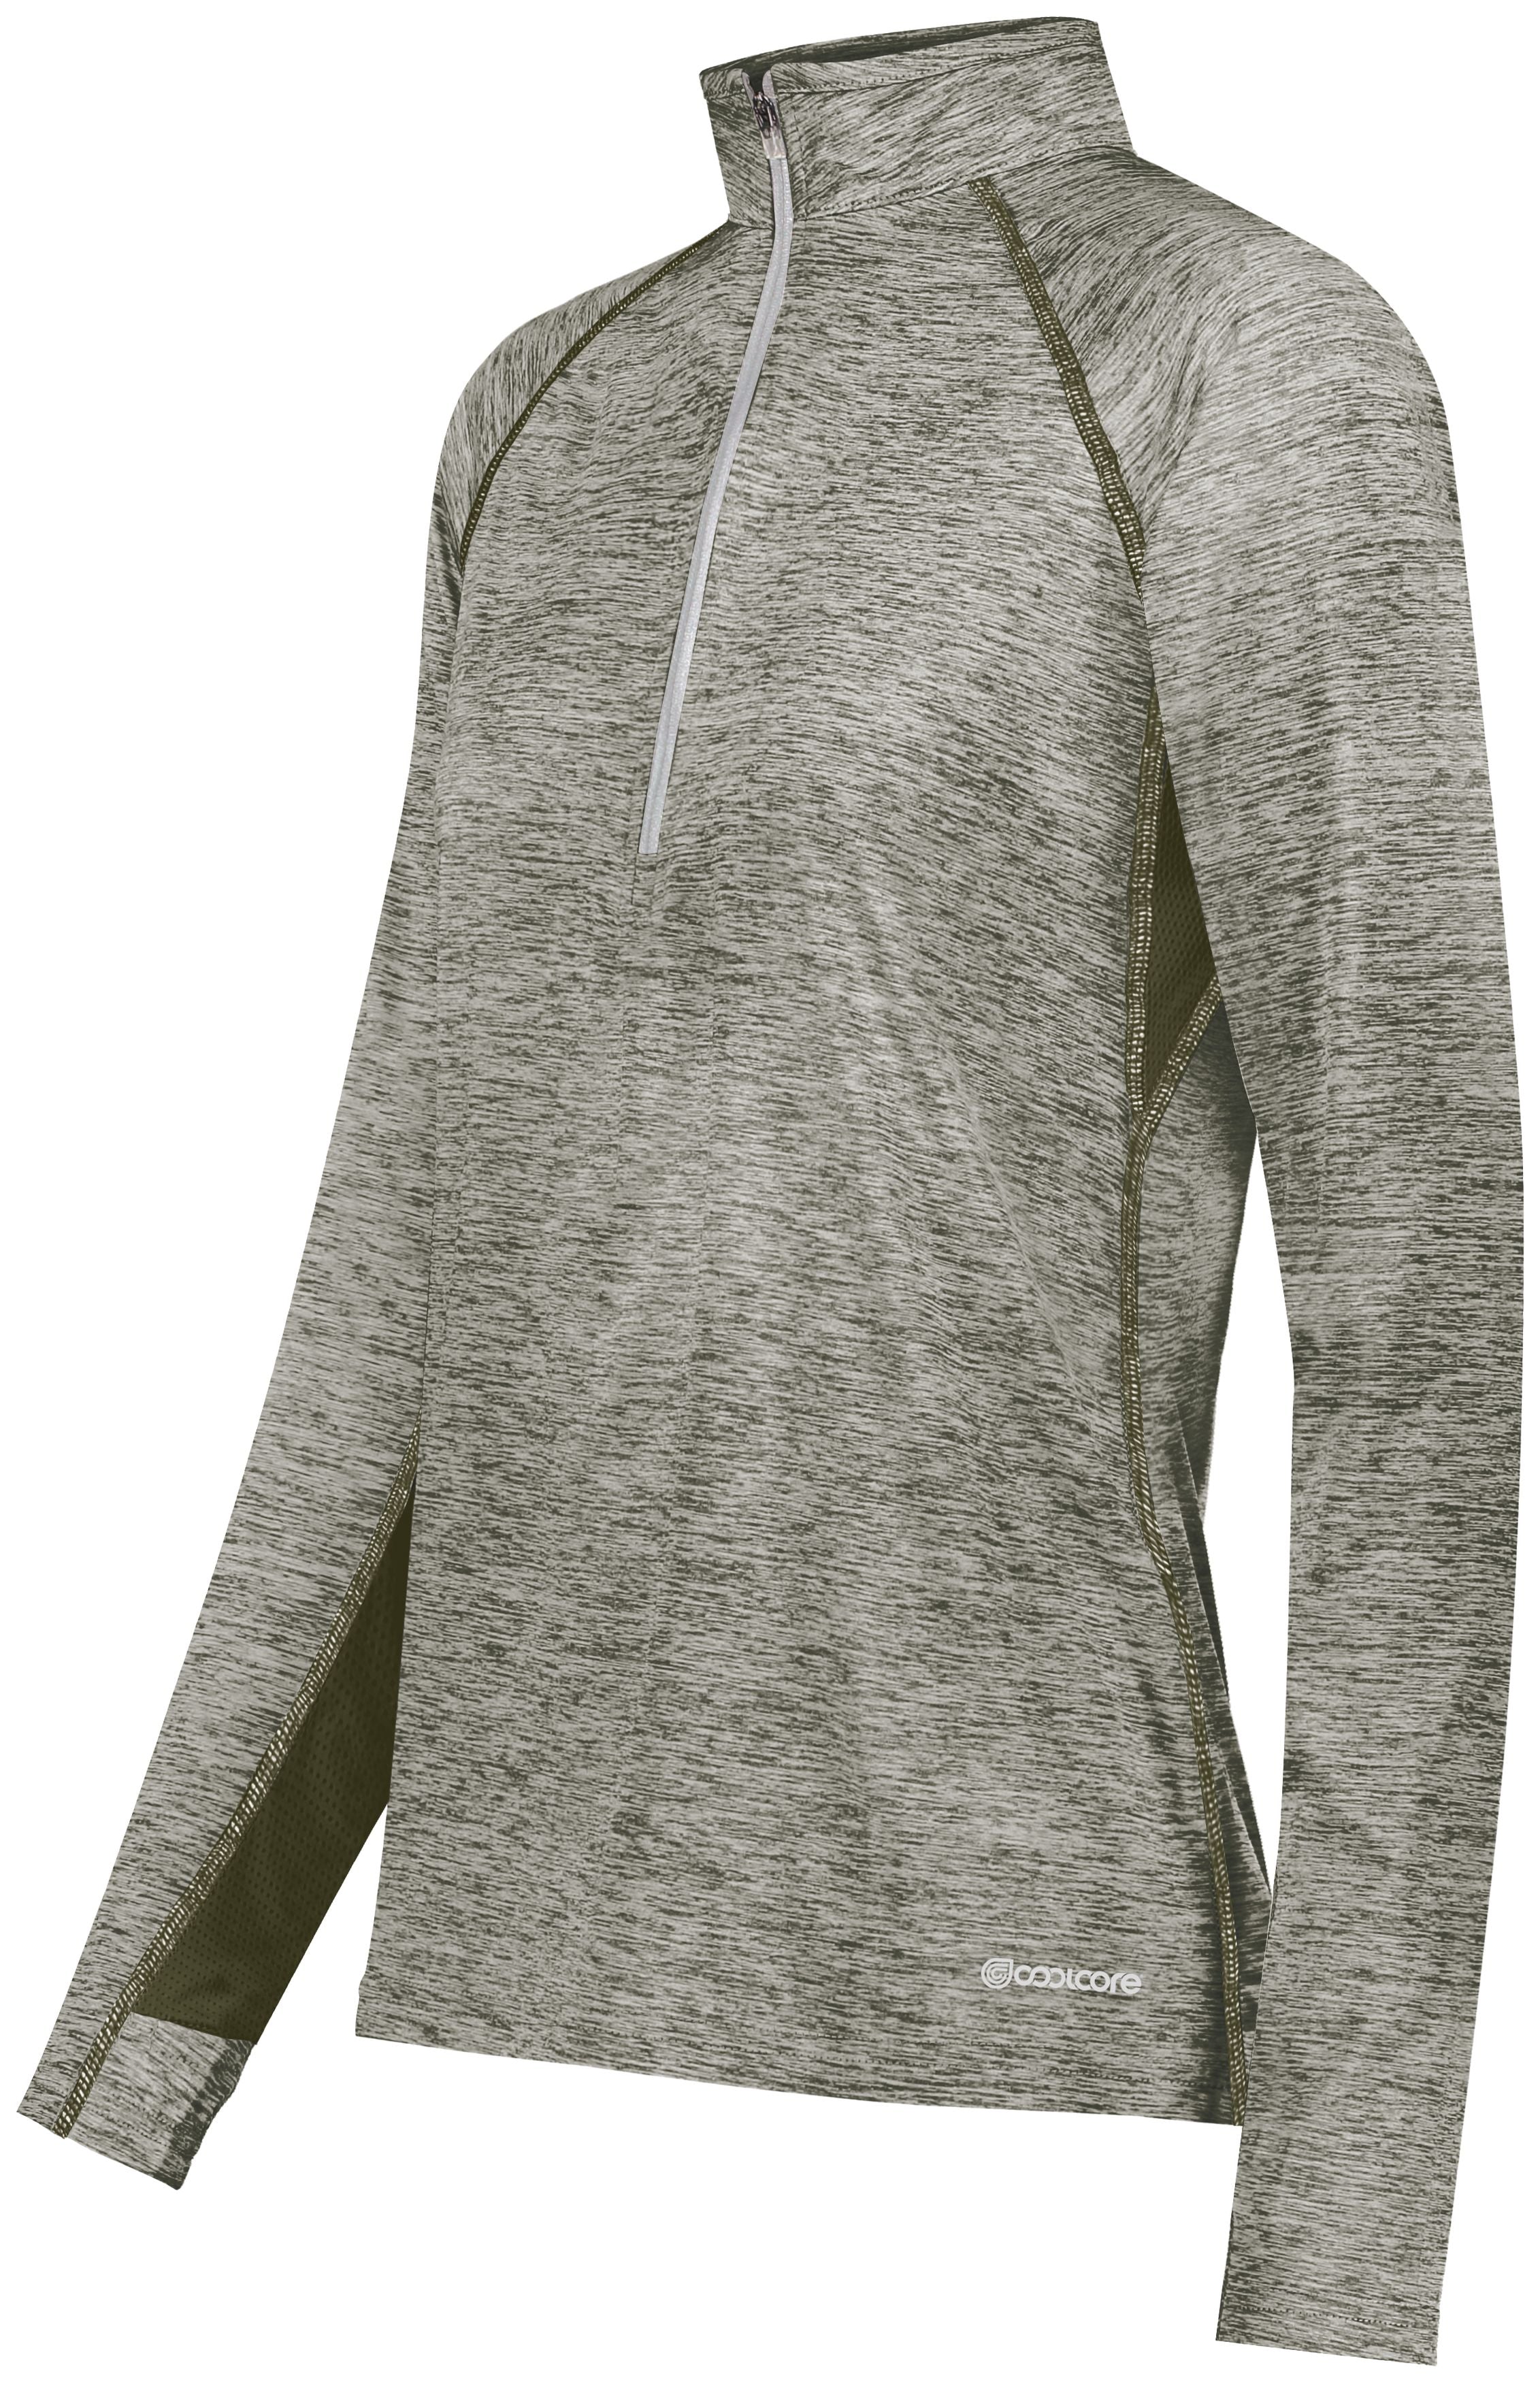 Ladies Electrify Coolcore?? 1/2 Zip Pullover 222774